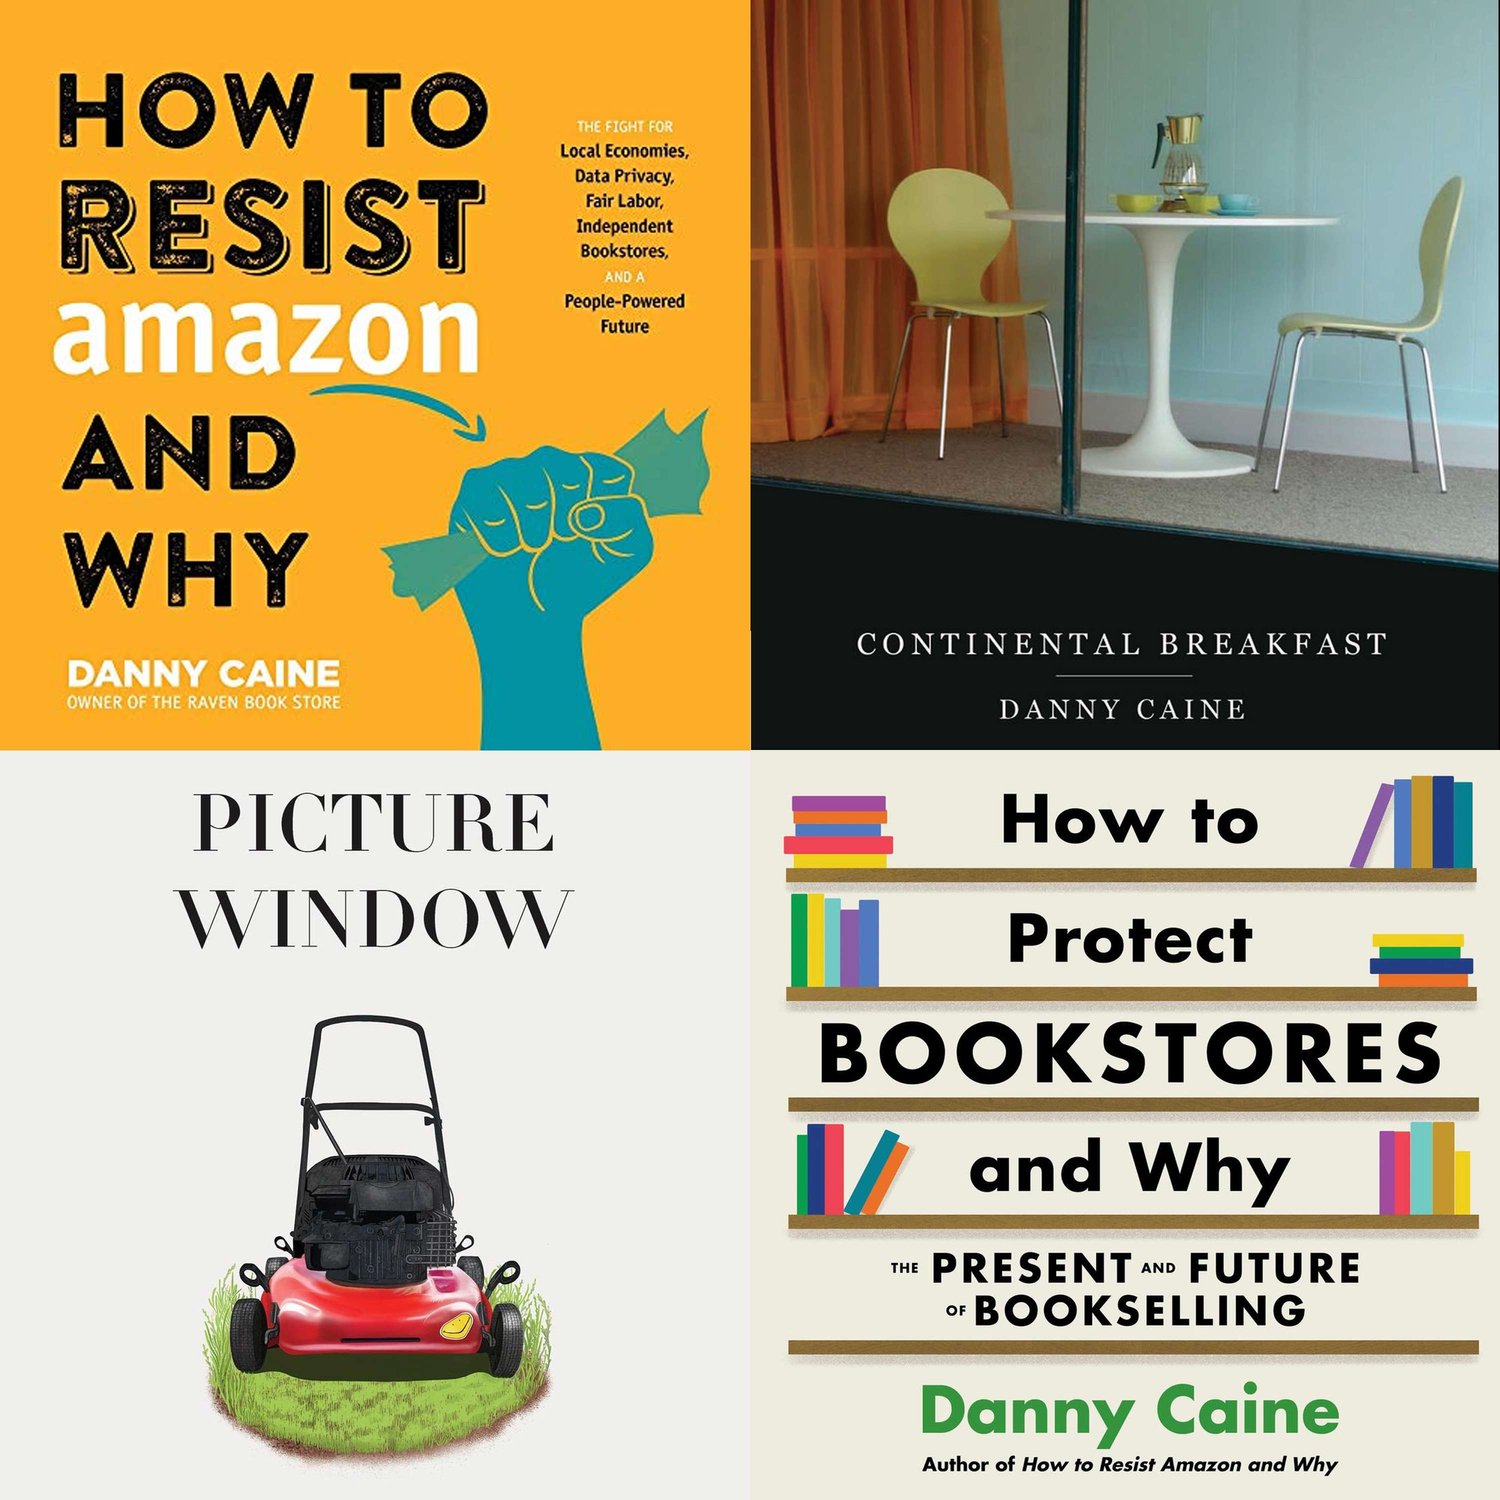 How to Protect Bookstores and Why - Highlights - DANNY CAINE, Bookseller, Poet